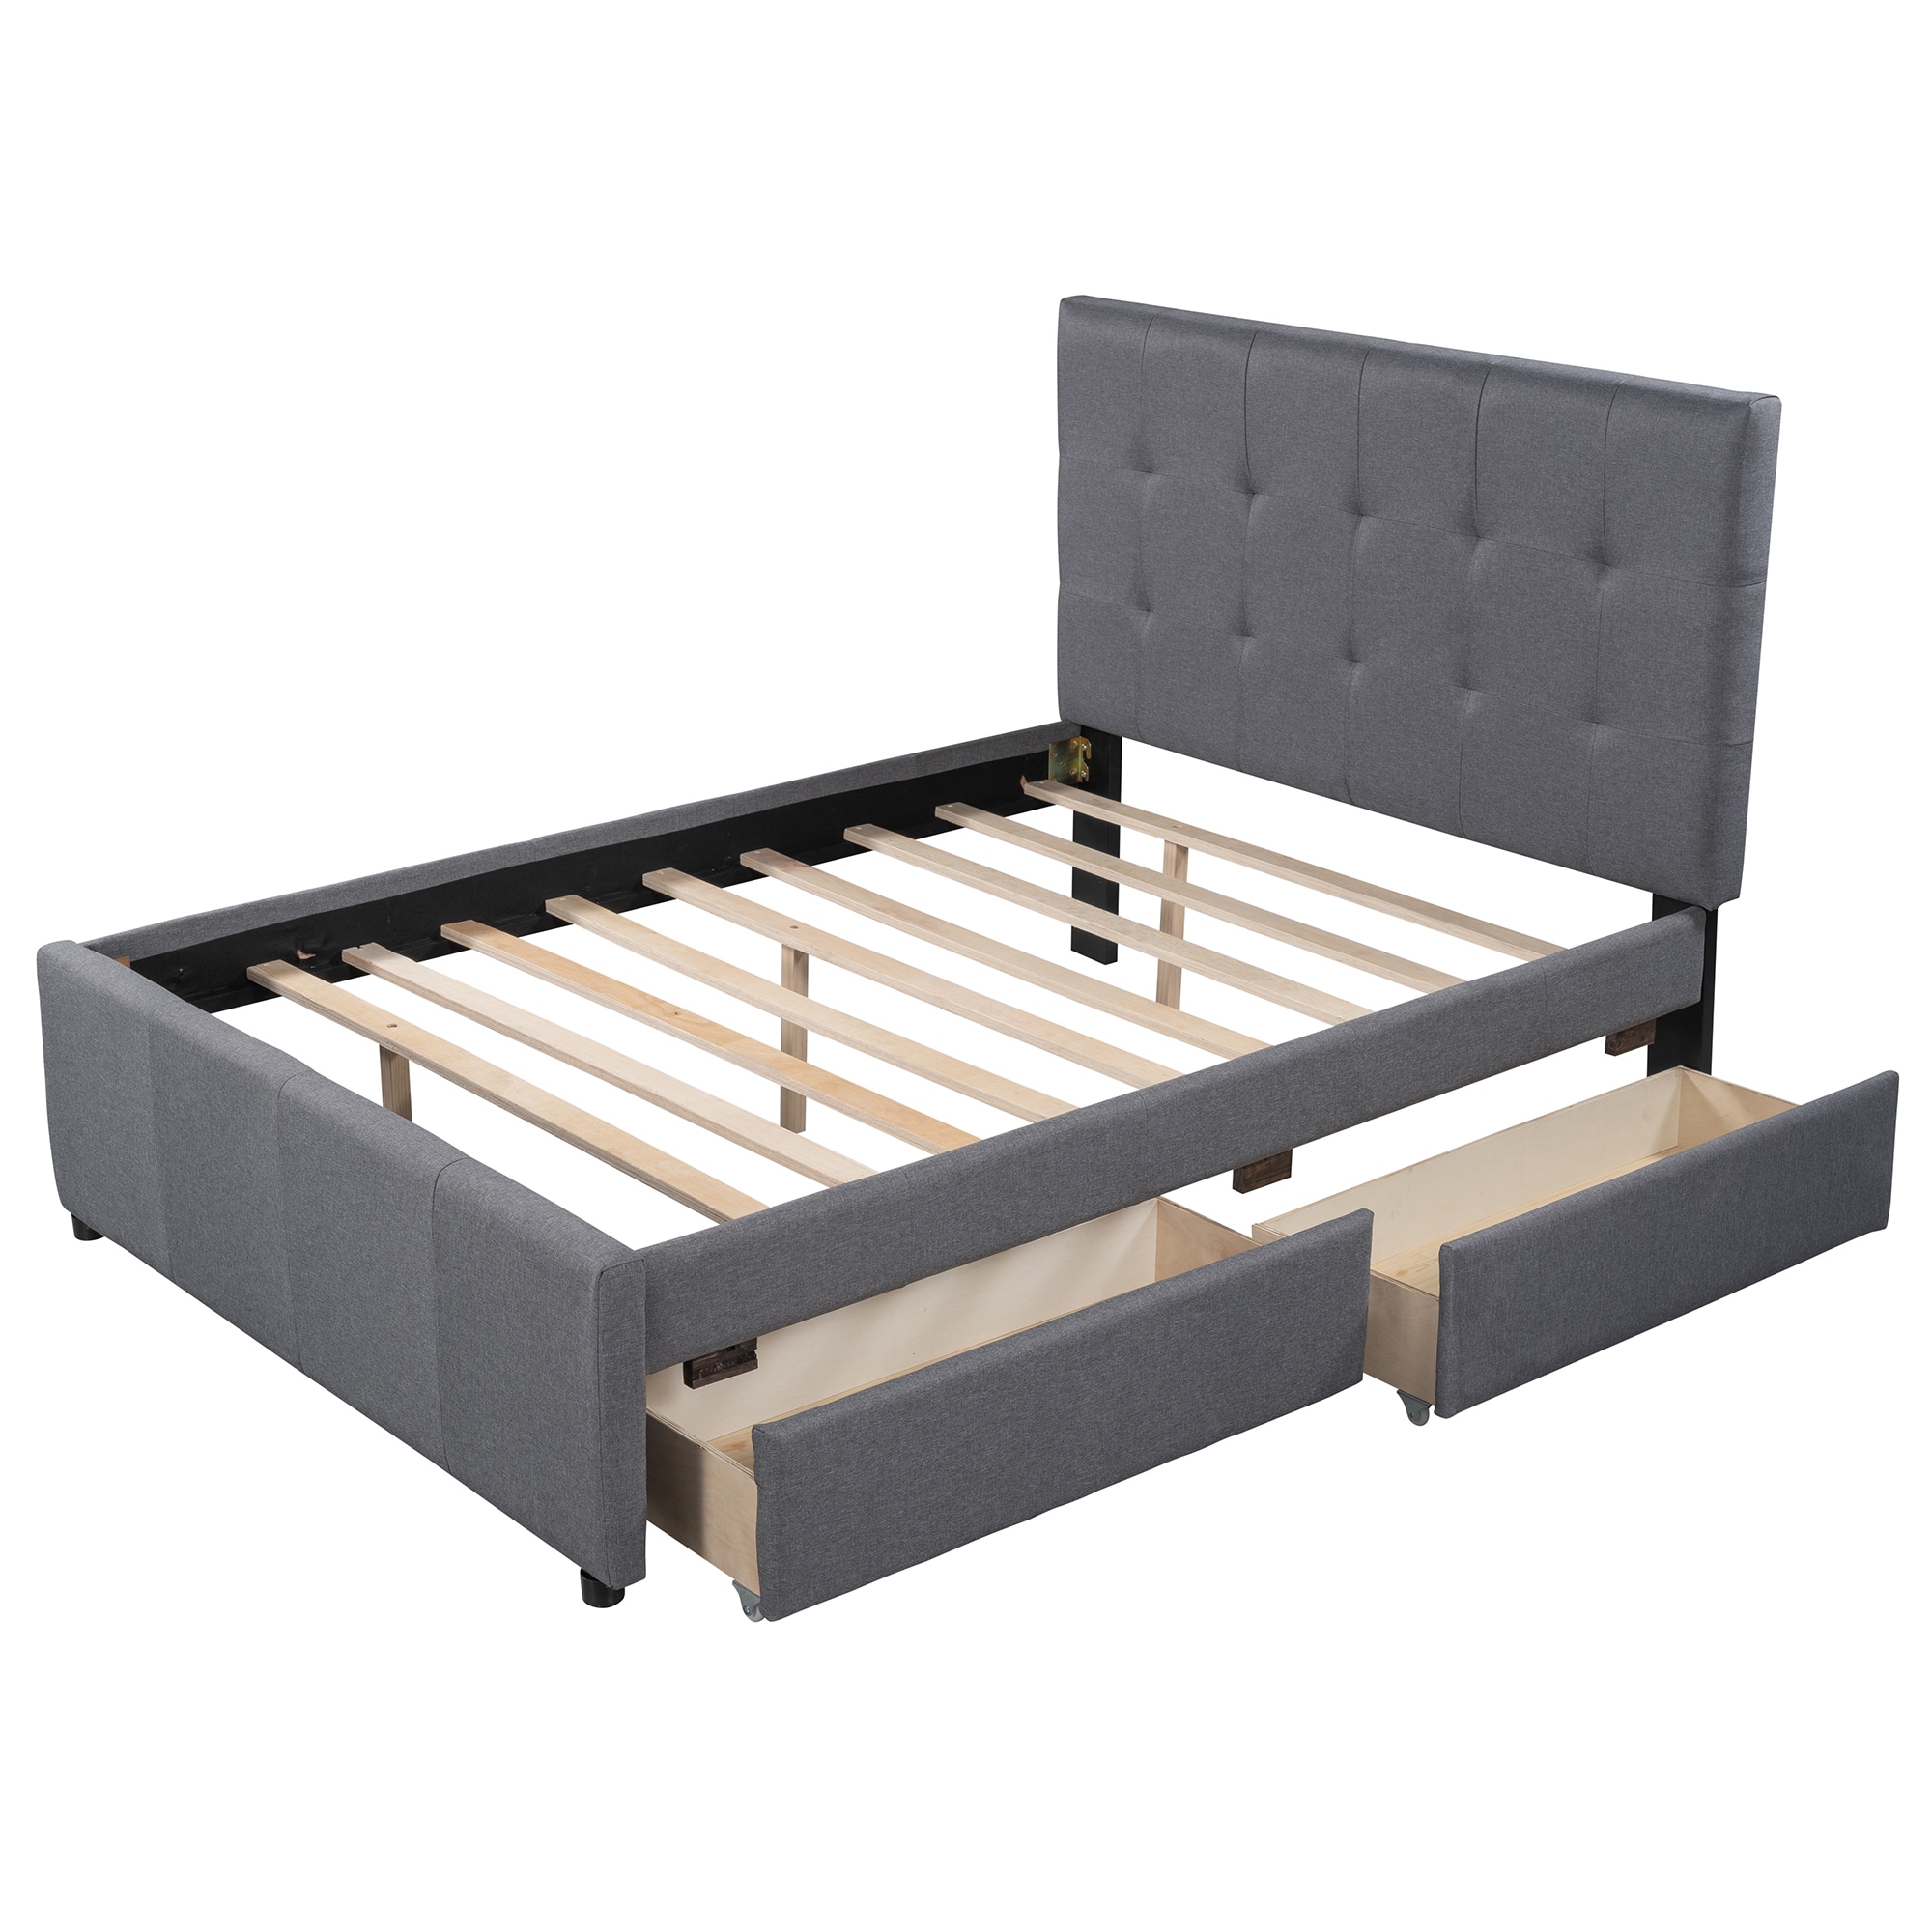 Upholstered Platform Bed with Two Drawers Beds at Lowes.com